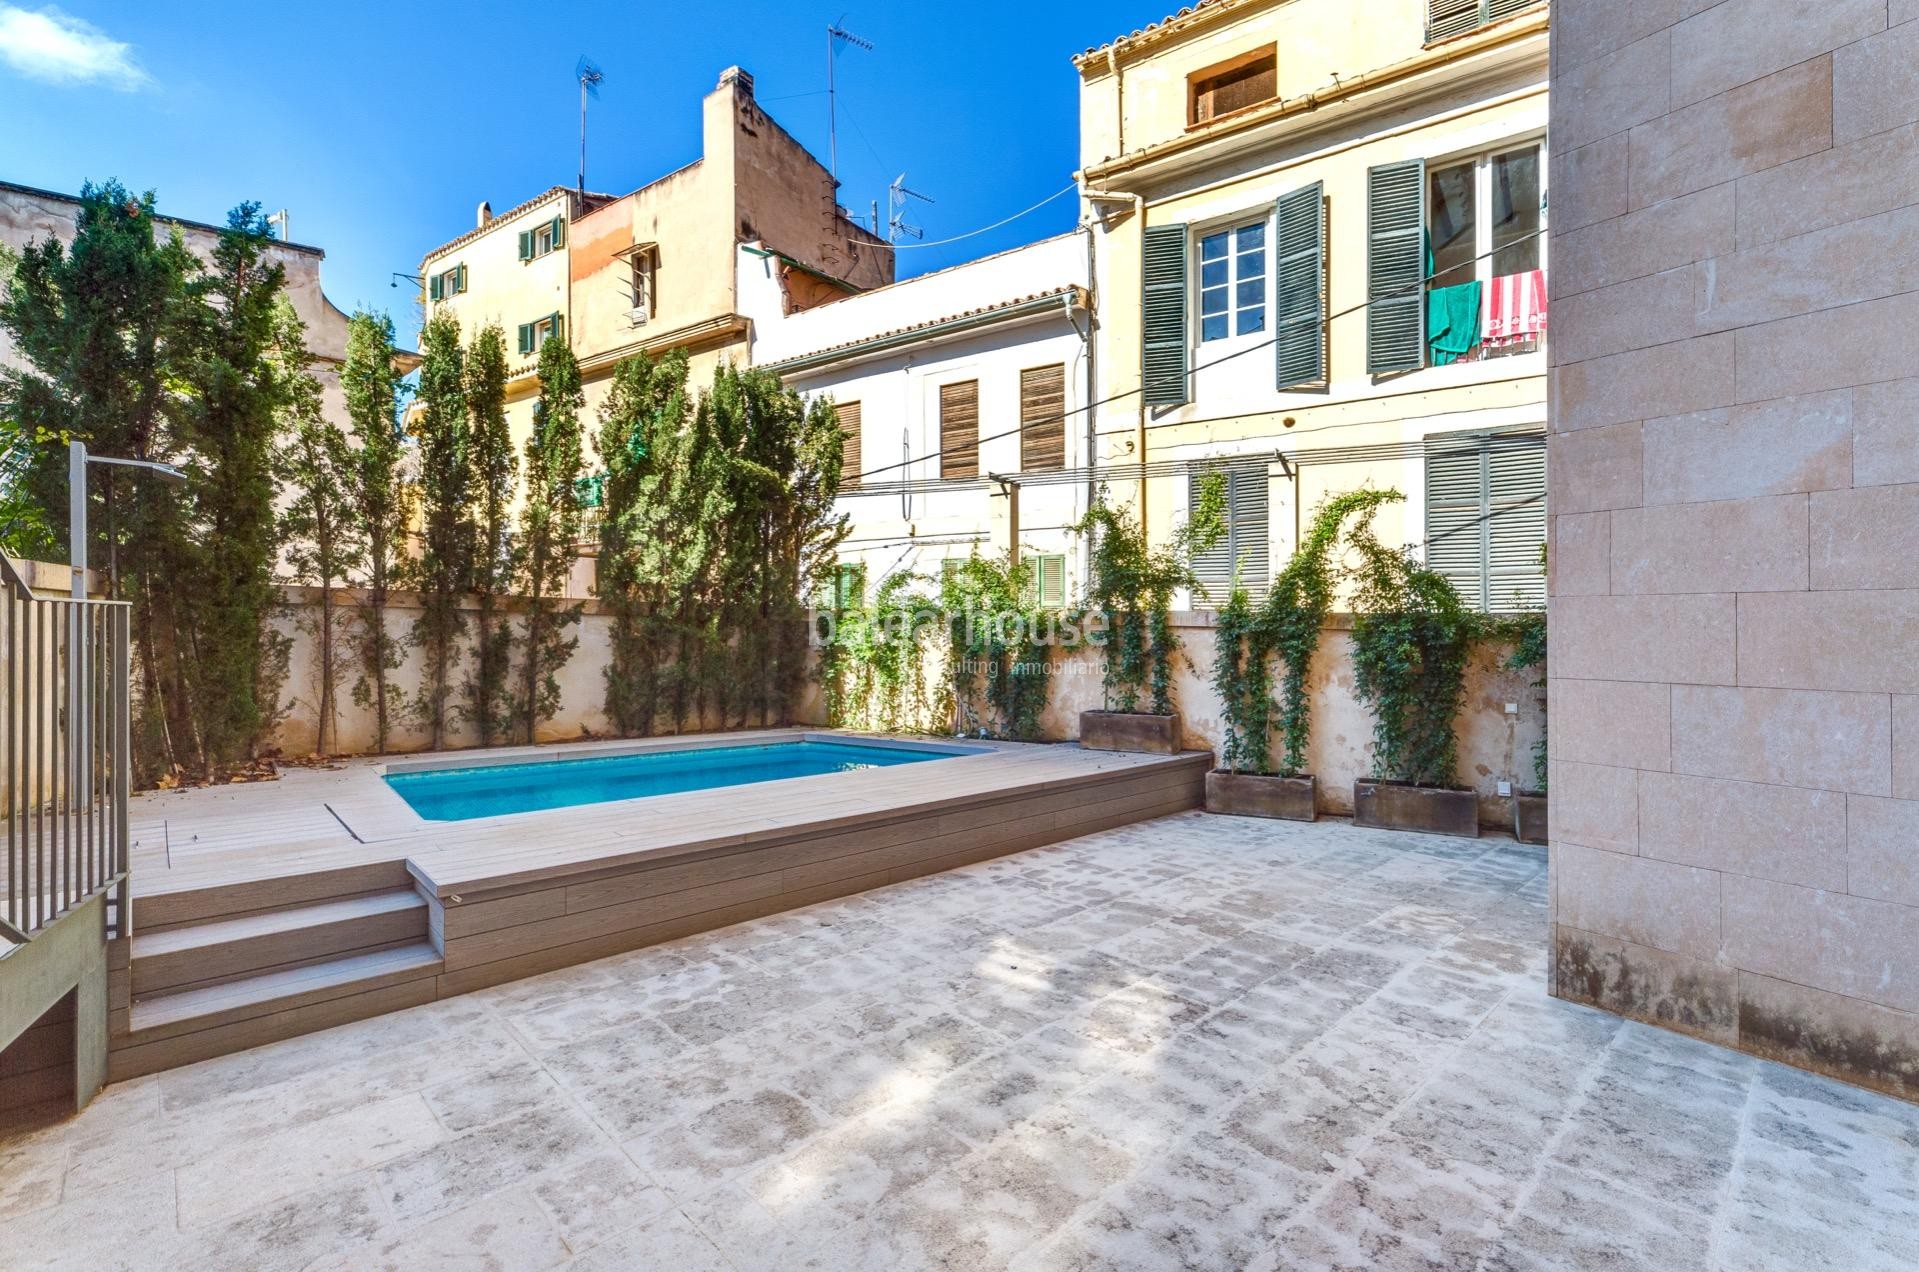 Excellent large designer duplex with terrace and pool in the spectacular historic centre of Palma